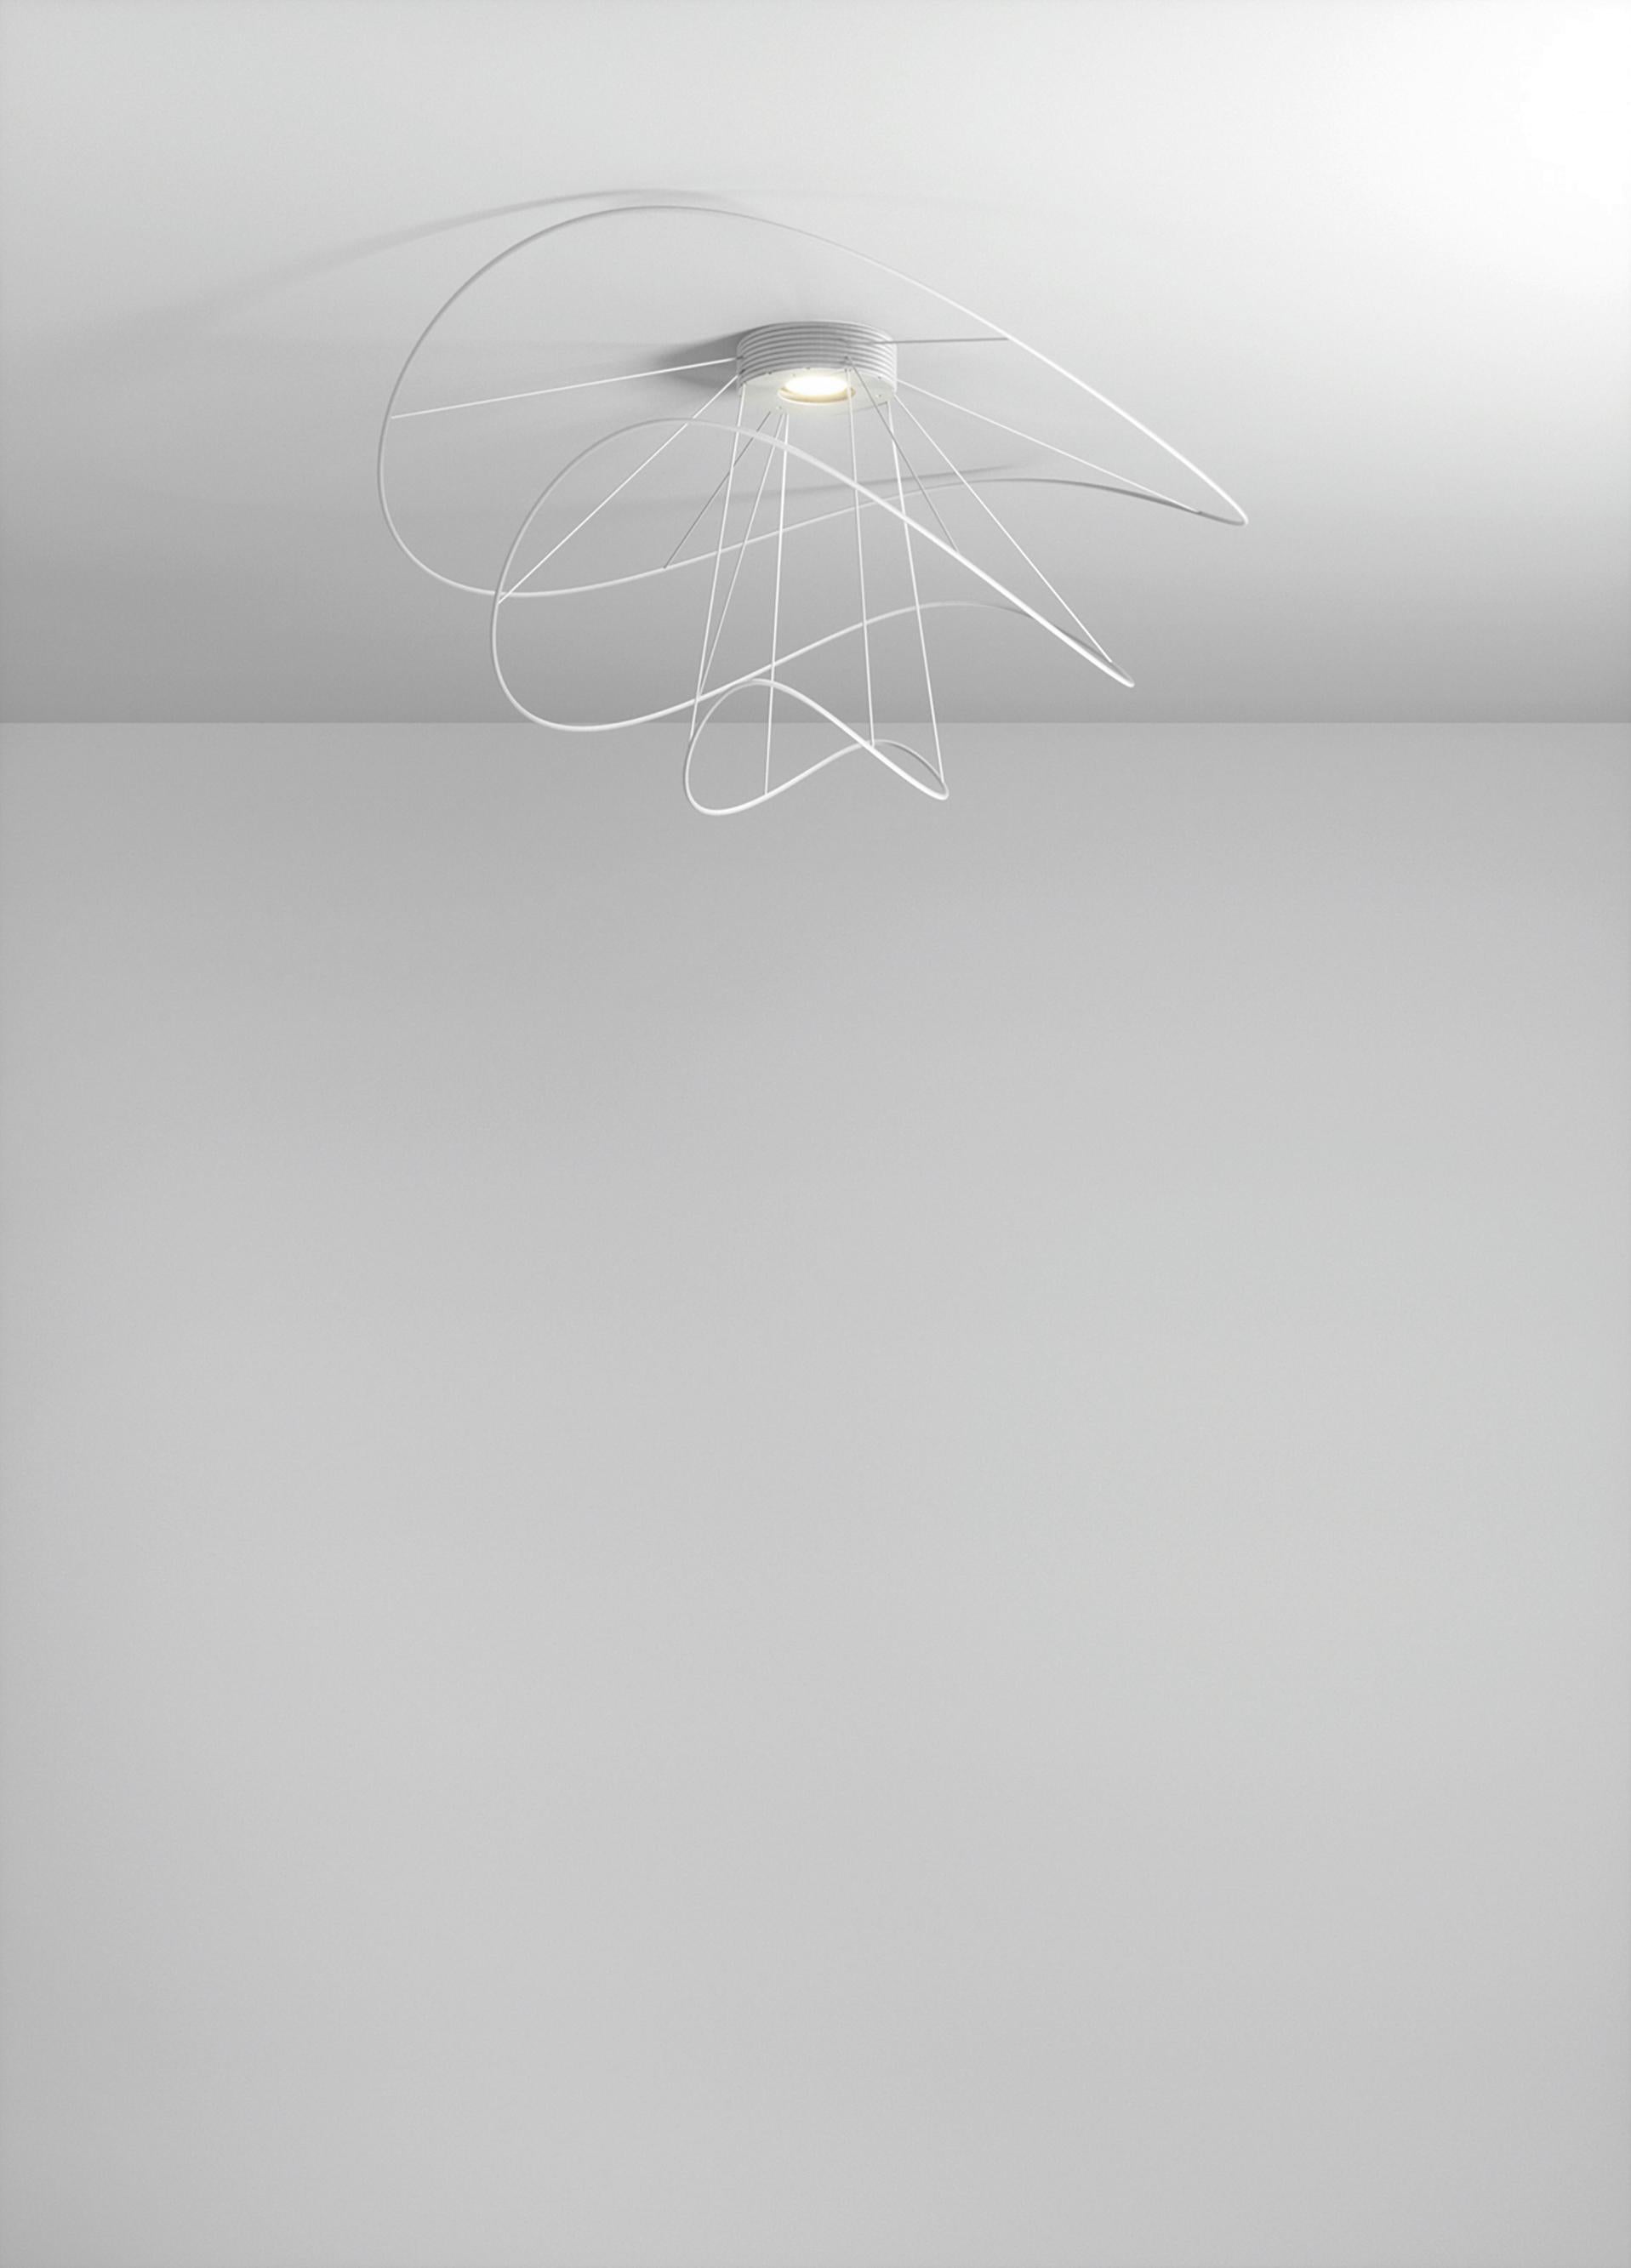 Axolight Hoops 3 Medium Flush Mount Ceiling Lamp in Black by Giovanni Barbato

Lines that dance voluptuously around a nucleus in a changing game of reflected shapes and light. The sinuosity of Hoops is a thin twirling thread, to be followed by the